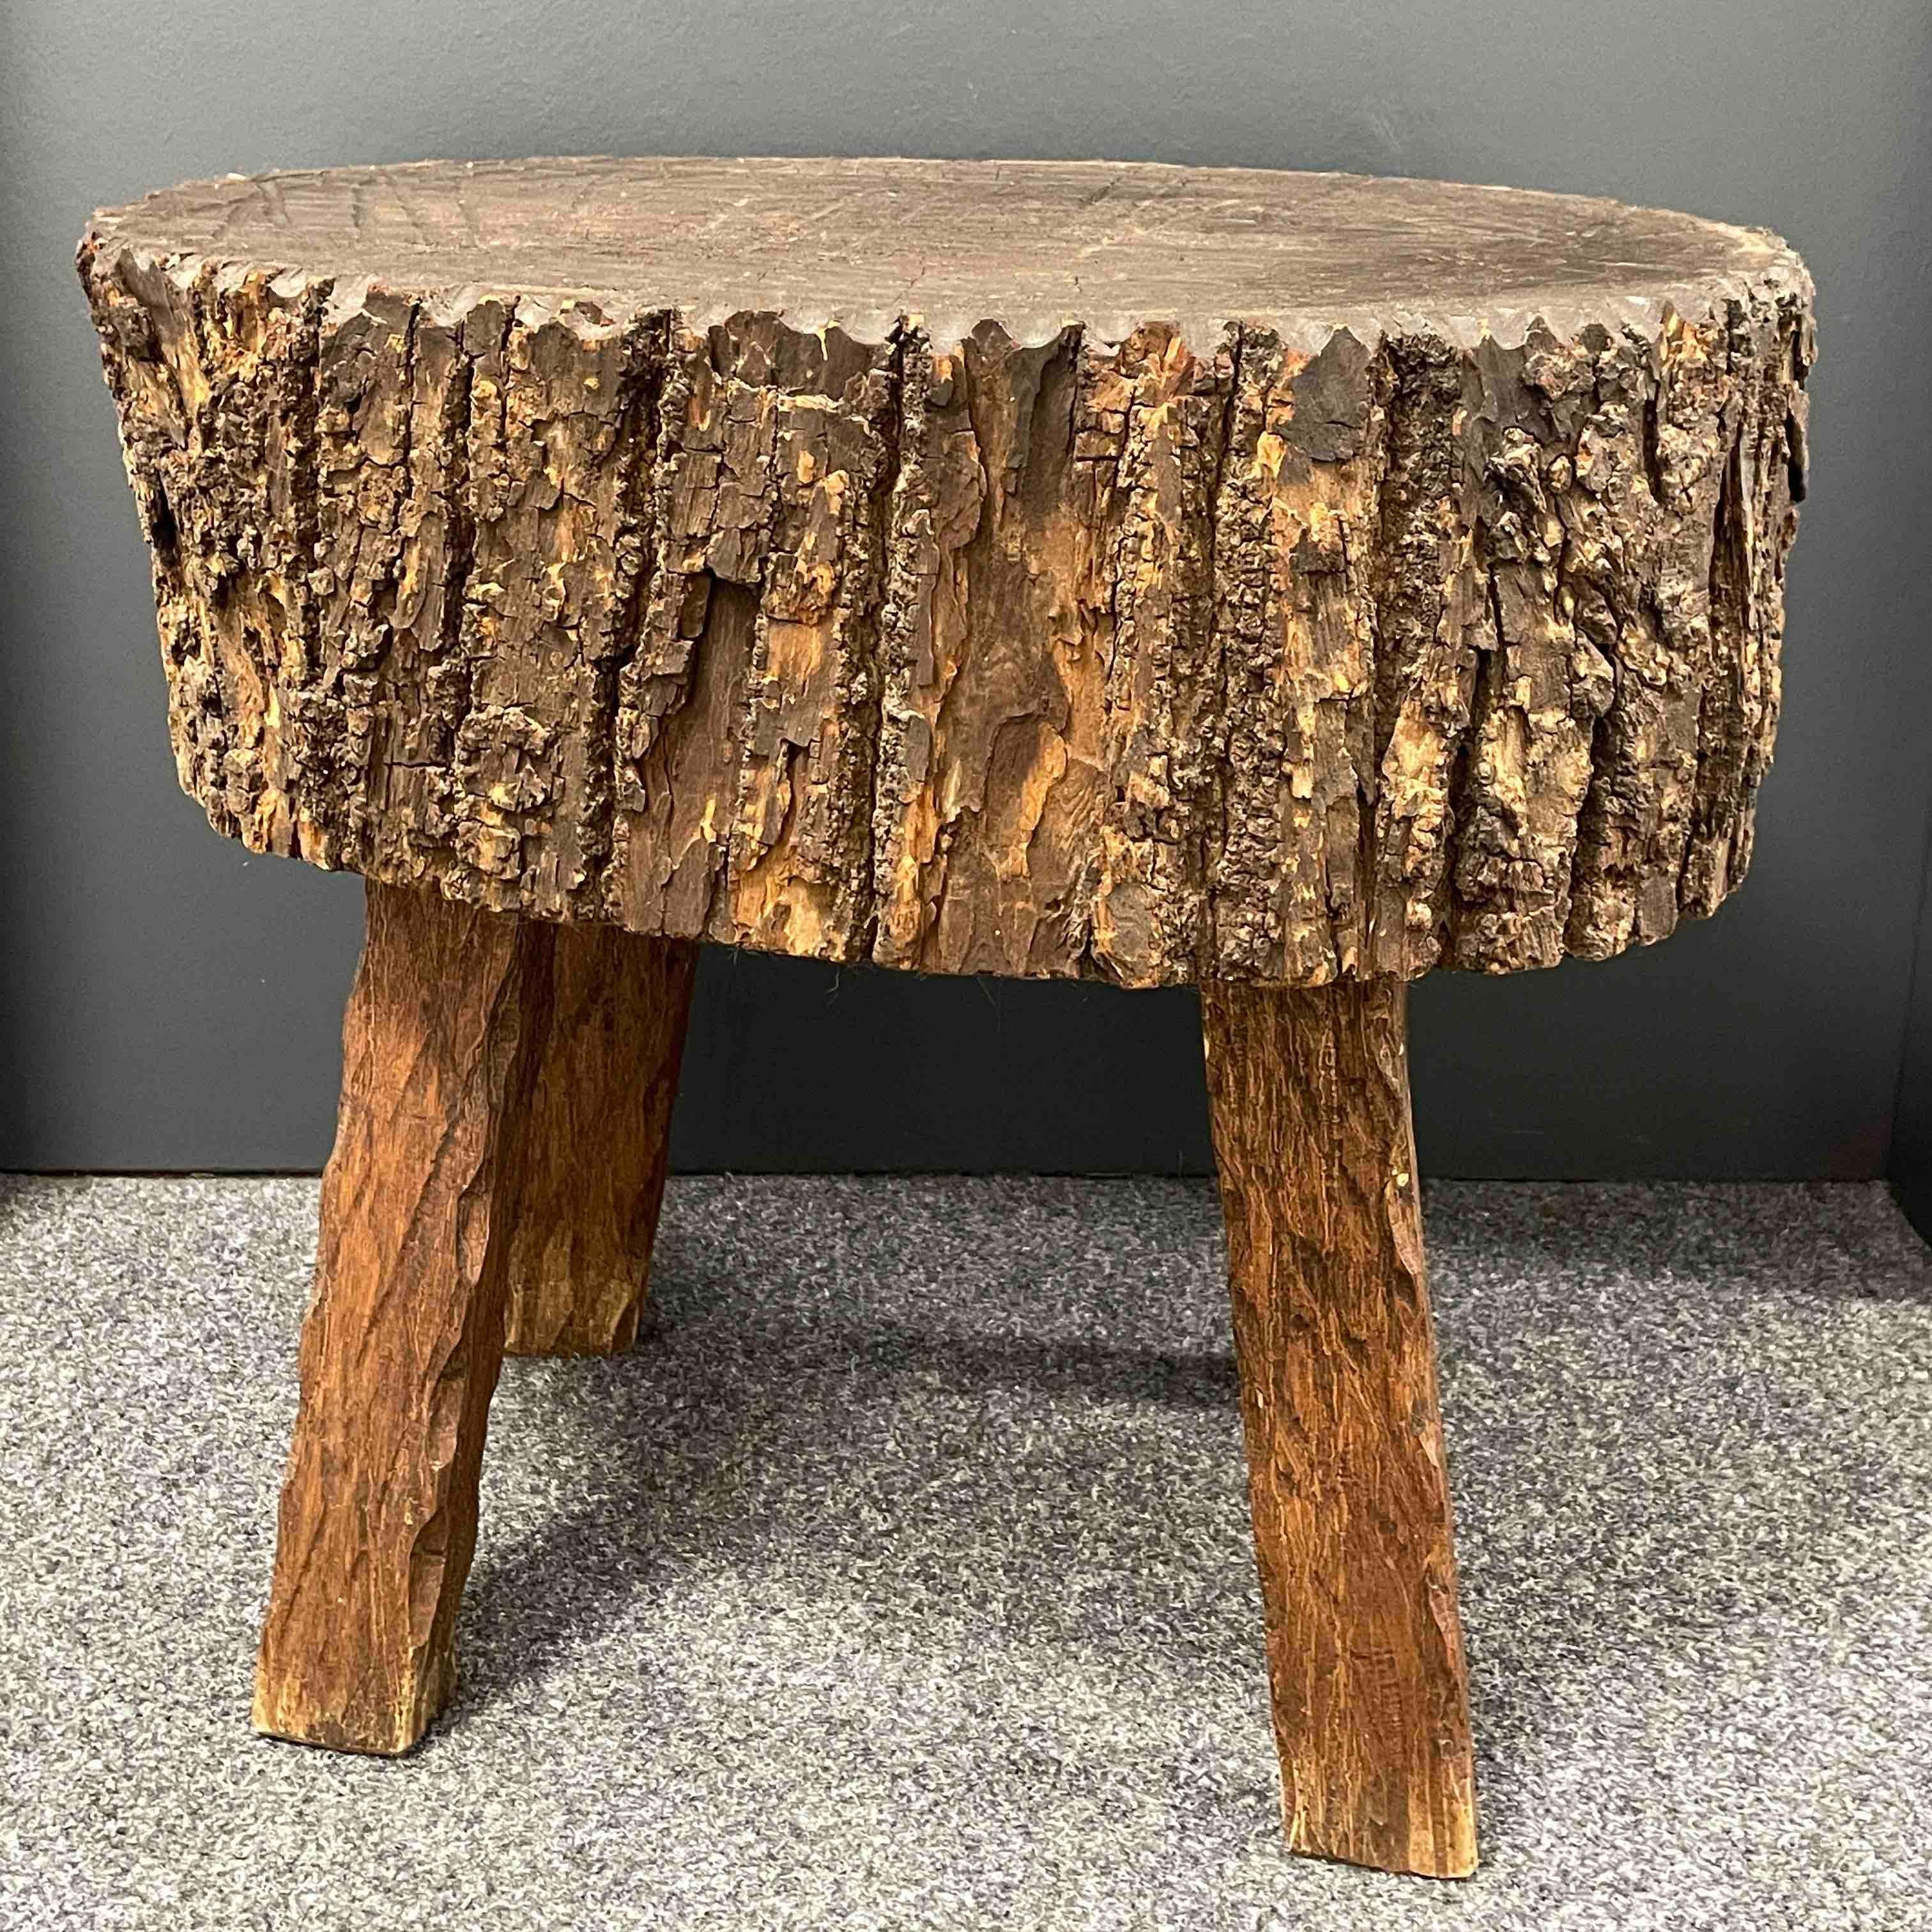 Offered is this Provincial antique rustic brutalist style chopping block table, circa 1960s or older. Nice primitive side or coffee table with lovely nice patina and stress cracks adding to its charm. Bold and strong this table is an early and solid